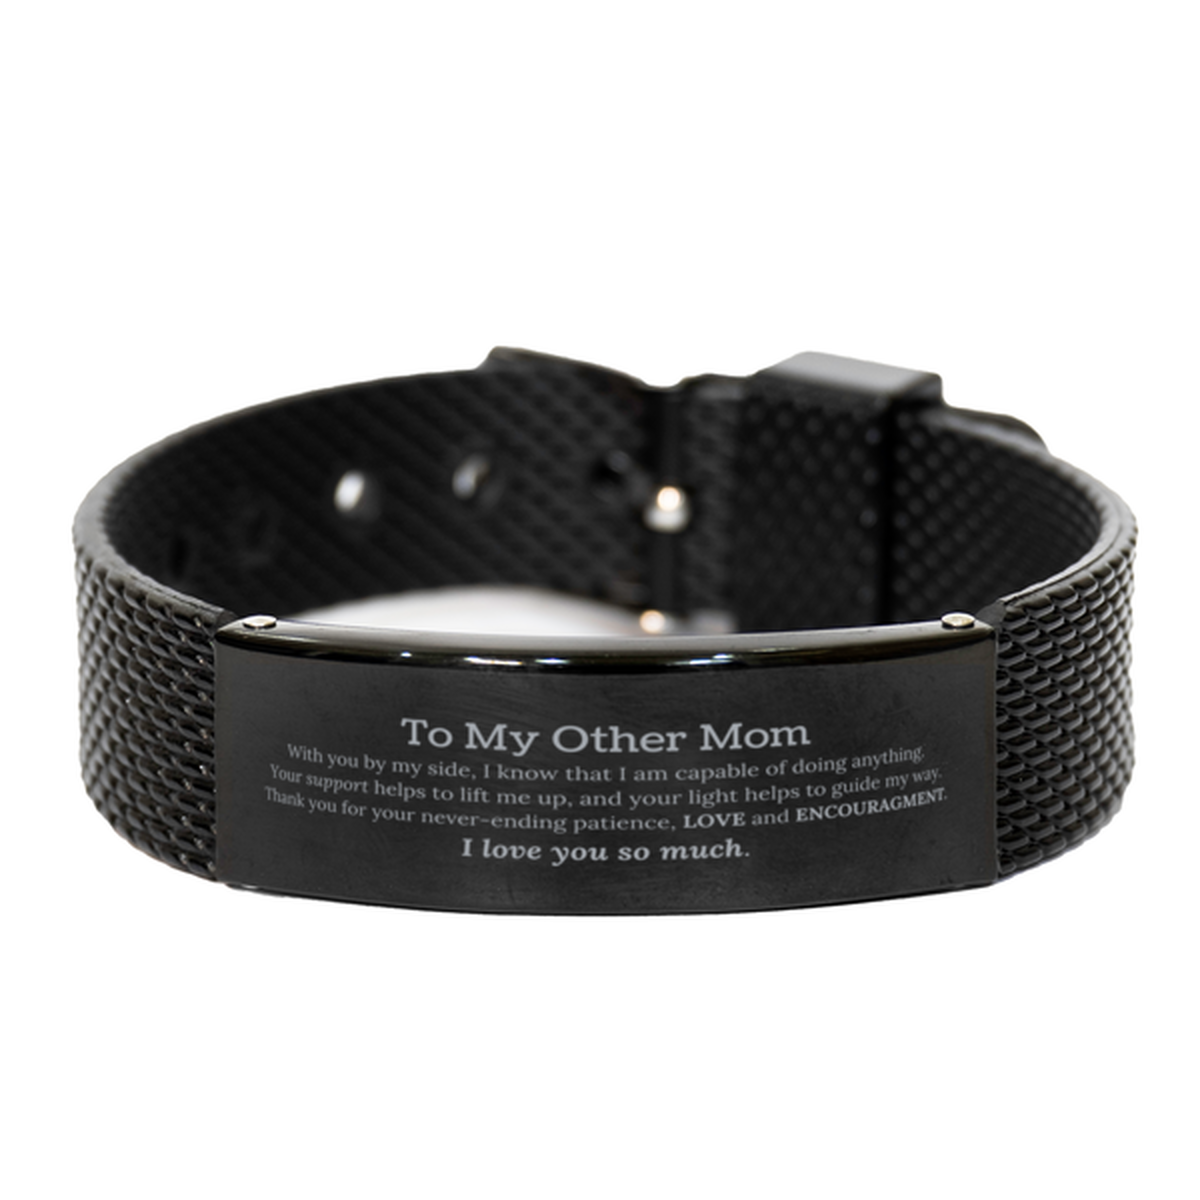 Appreciation Other Mom Black Shark Mesh Bracelet Gifts, To My Other Mom Birthday Christmas Wedding Keepsake Gifts for Other Mom With you by my side, I know that I am capable of doing anything. I love you so much